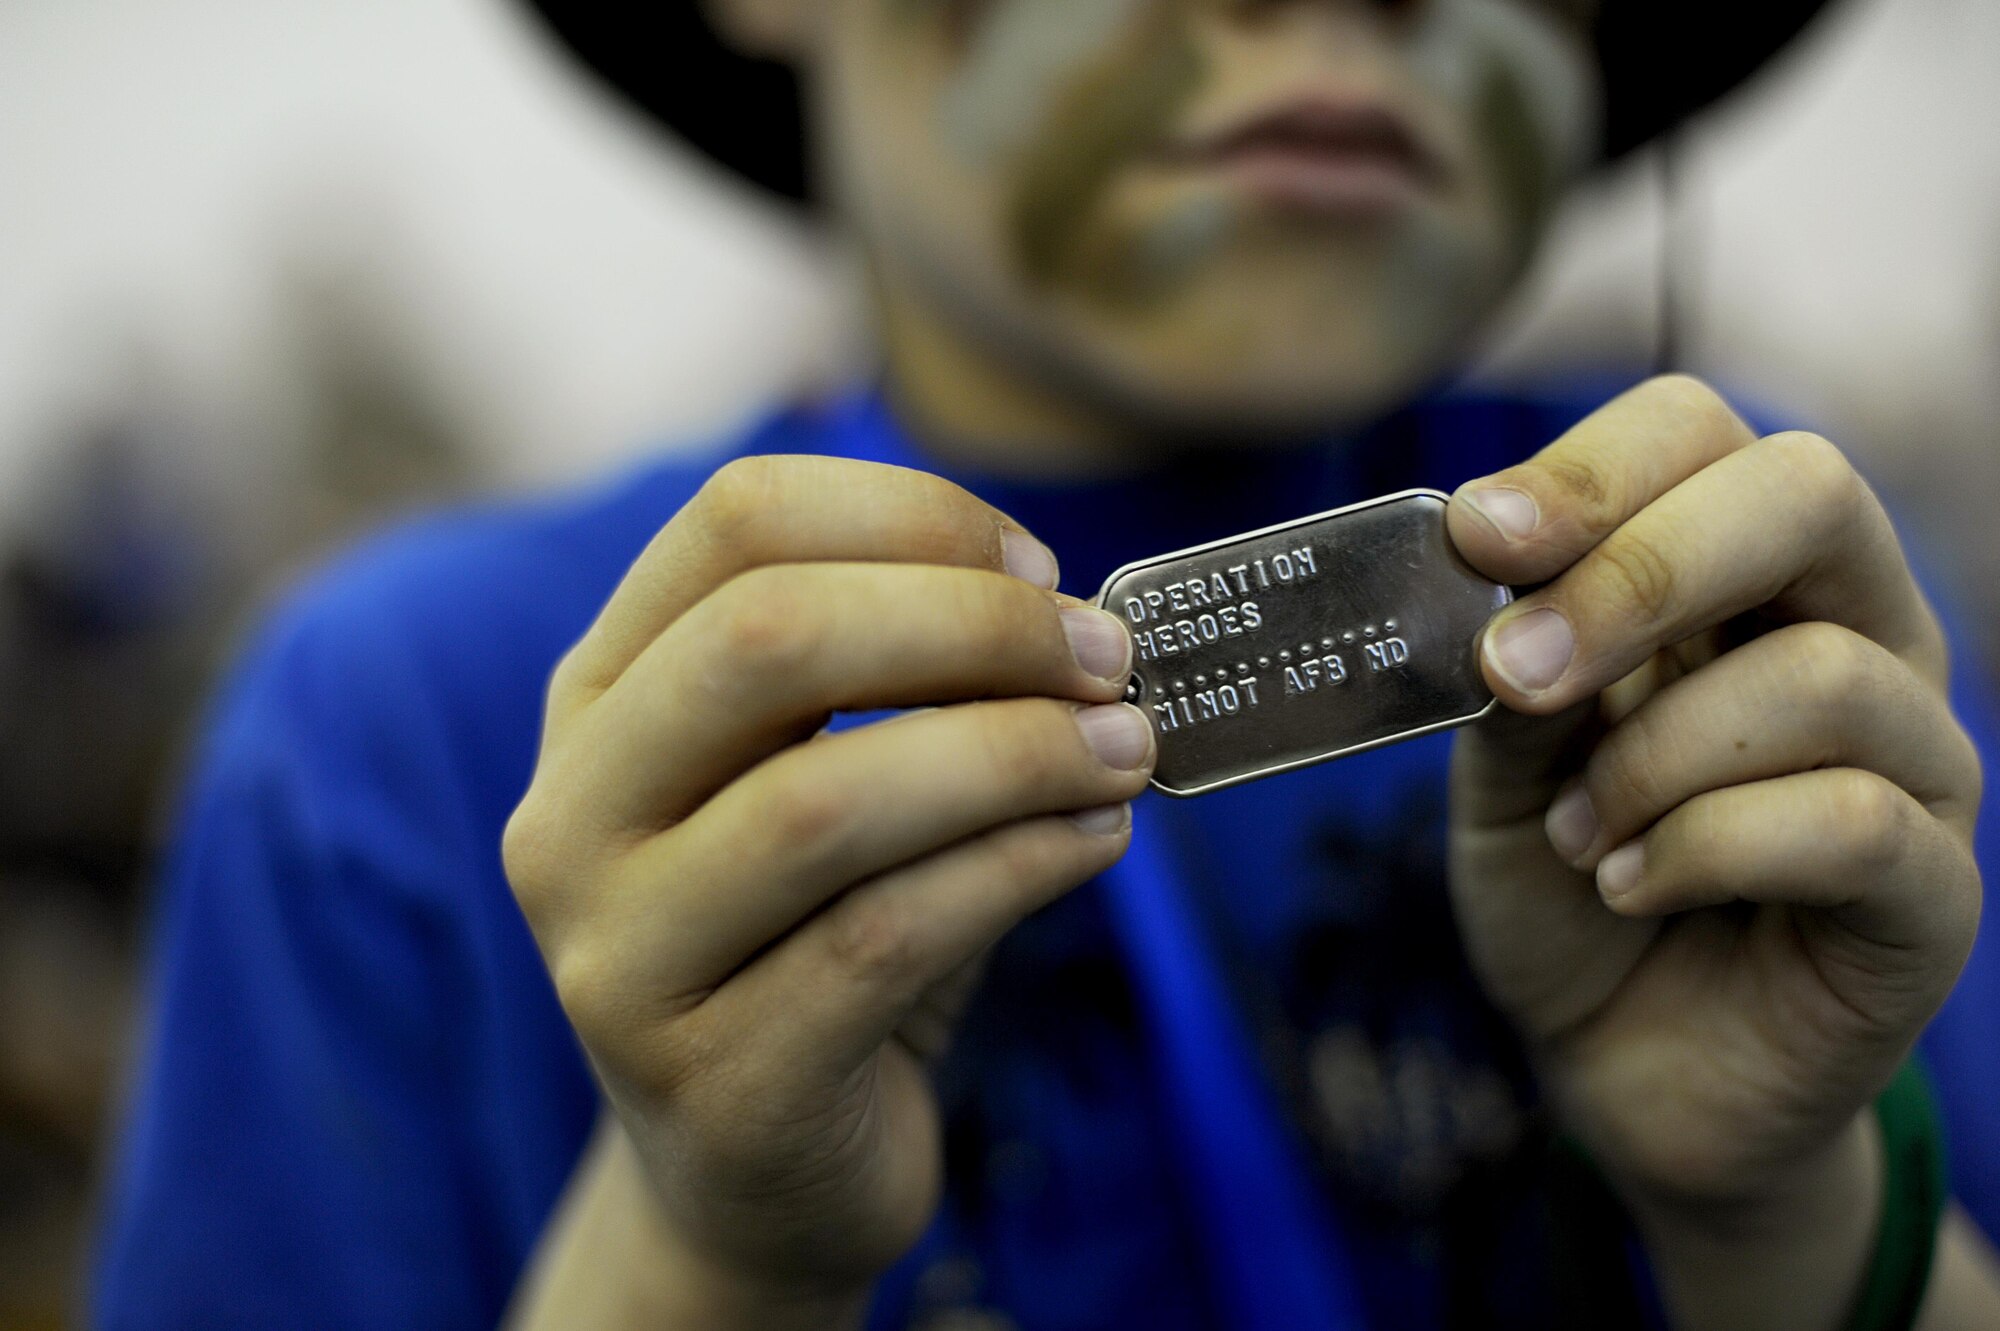 Ashton Trujillo shows off his Operation Heroes dog tags at Minot Air Force Base, N.D., June 3, 2017. Children from the base participated in Operation Heroes which gives them a taste of what it’s like to deploy like their parents. (U.S. Air Force Photo by Staff Sgt. Chad Trujillo)